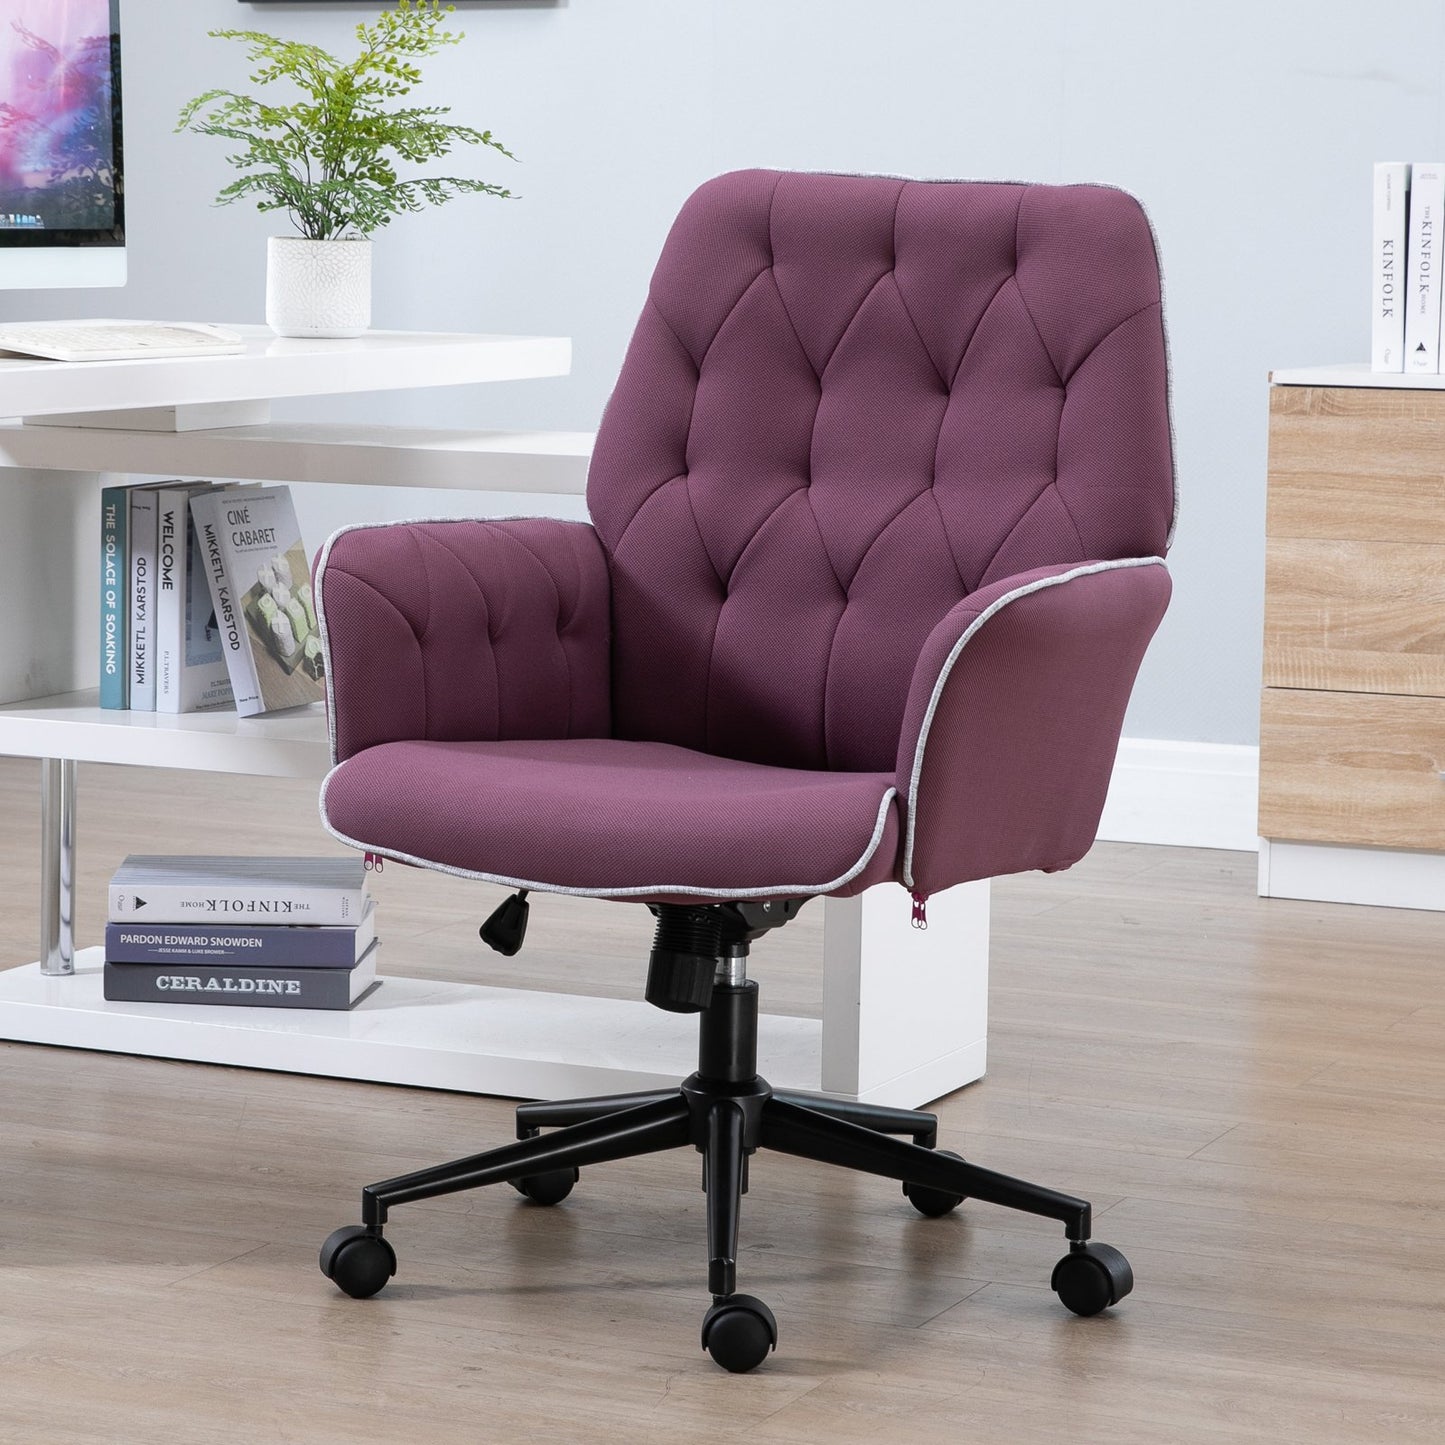 Vinsetto Linen Office Swivel Chair Mid Back Computer Desk Chair with Adjustable Seat, Arm - Purple